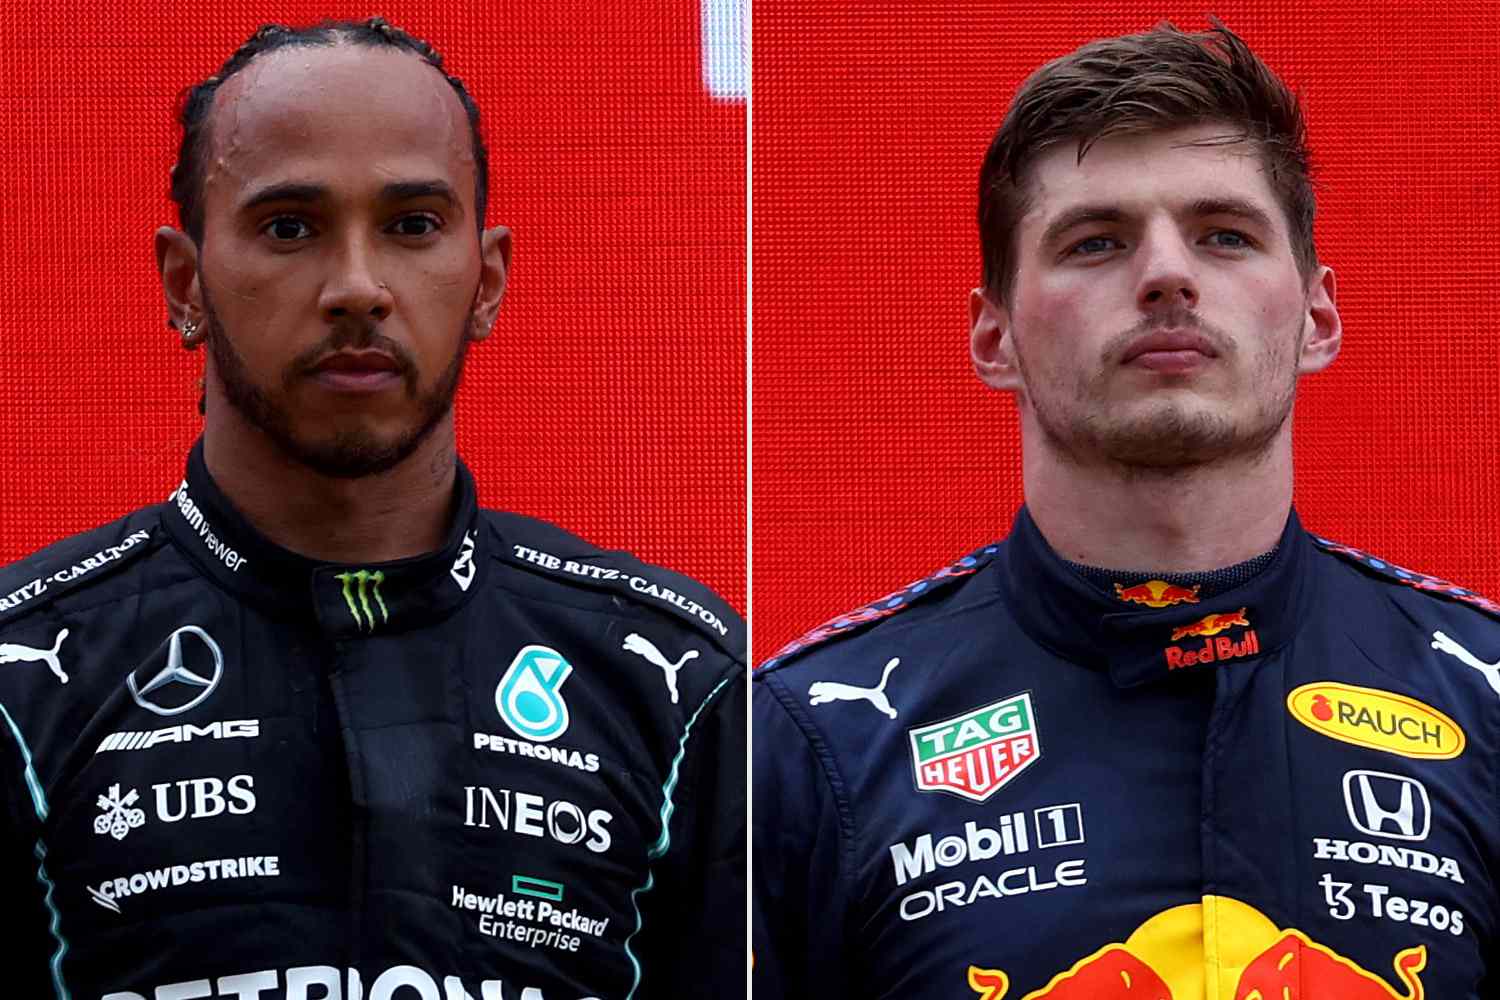 F1 stewards once penalized Max Verstappen for bizarre crash with Lewis Hamilton